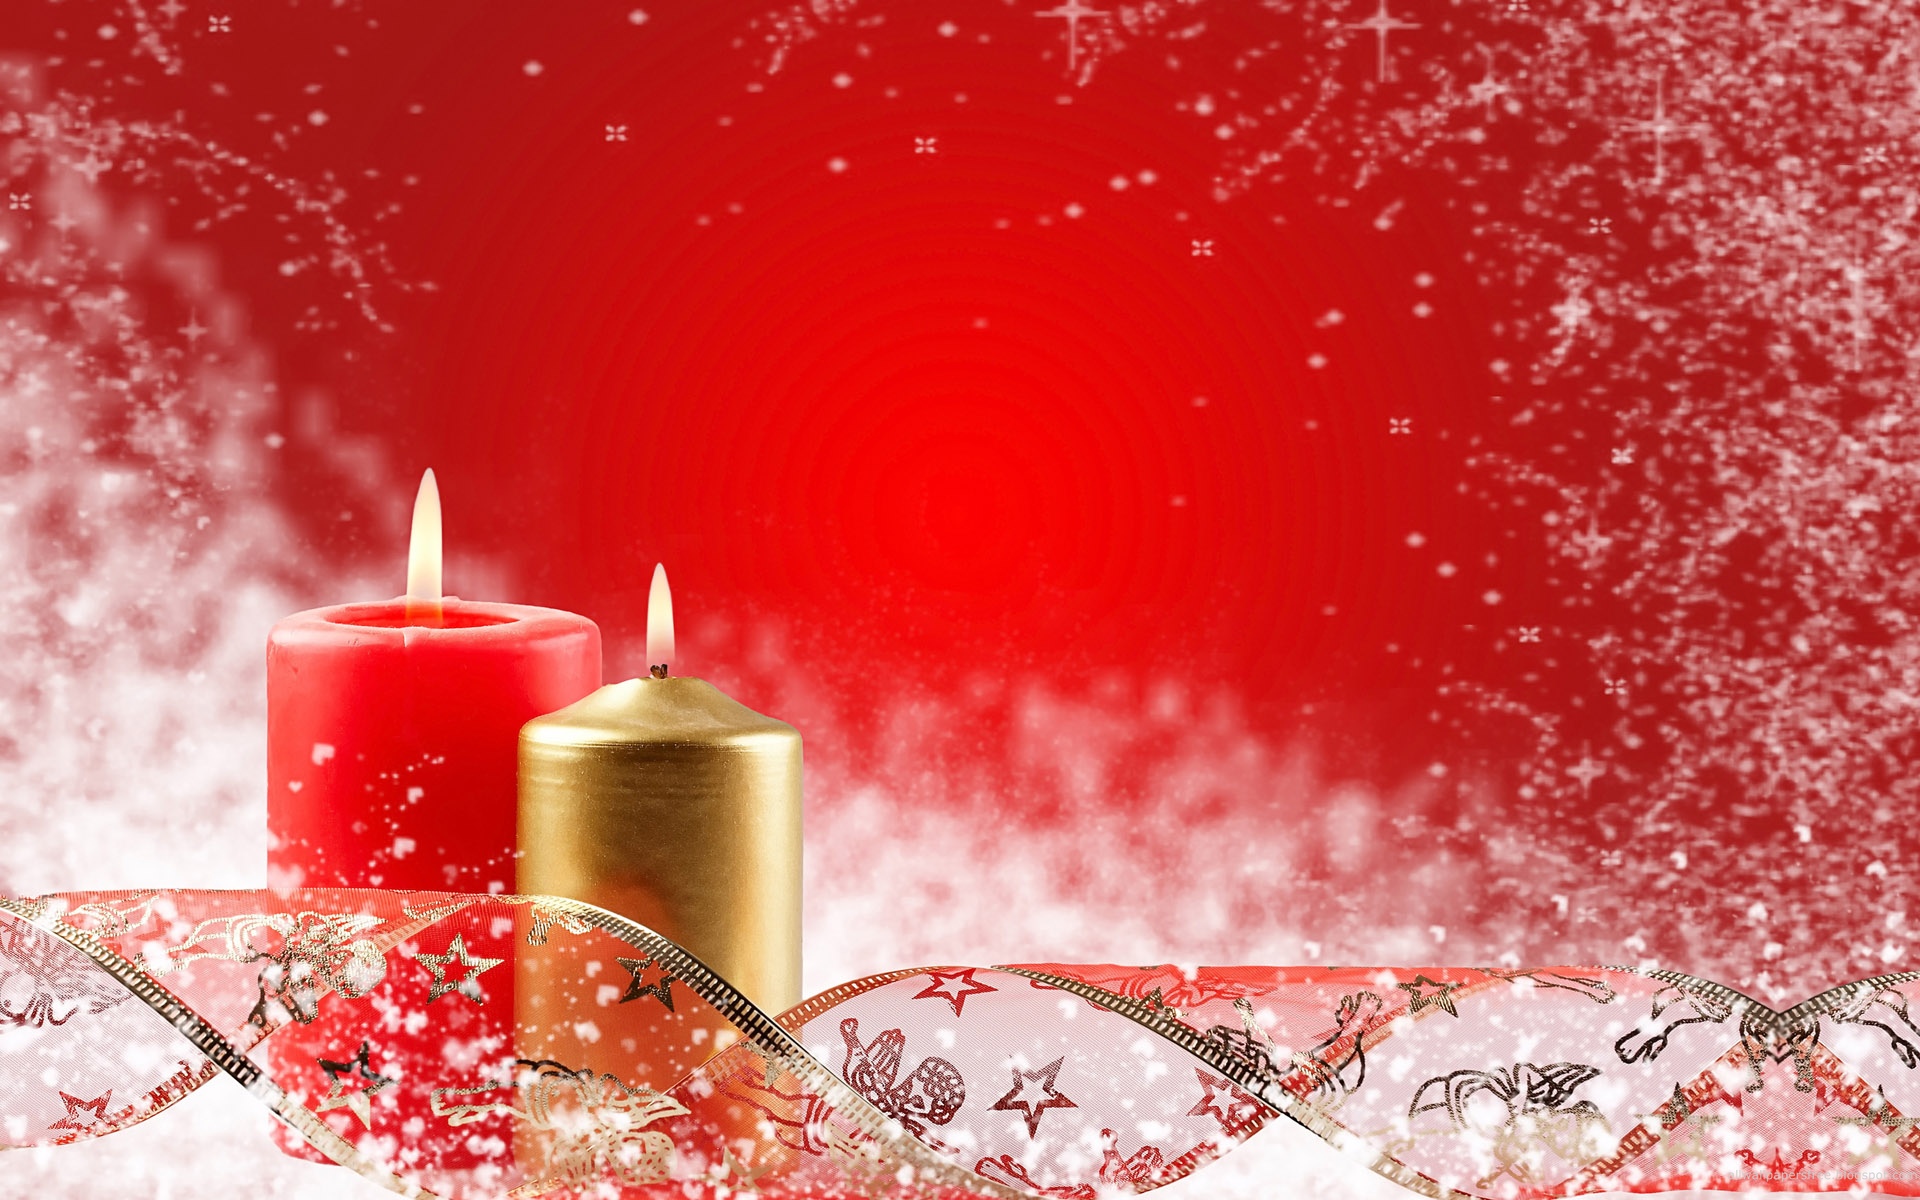 Immagini Natale In Hd.Cool Hd Wallpapers Christmas Candles Wallpaper For Desktop Background